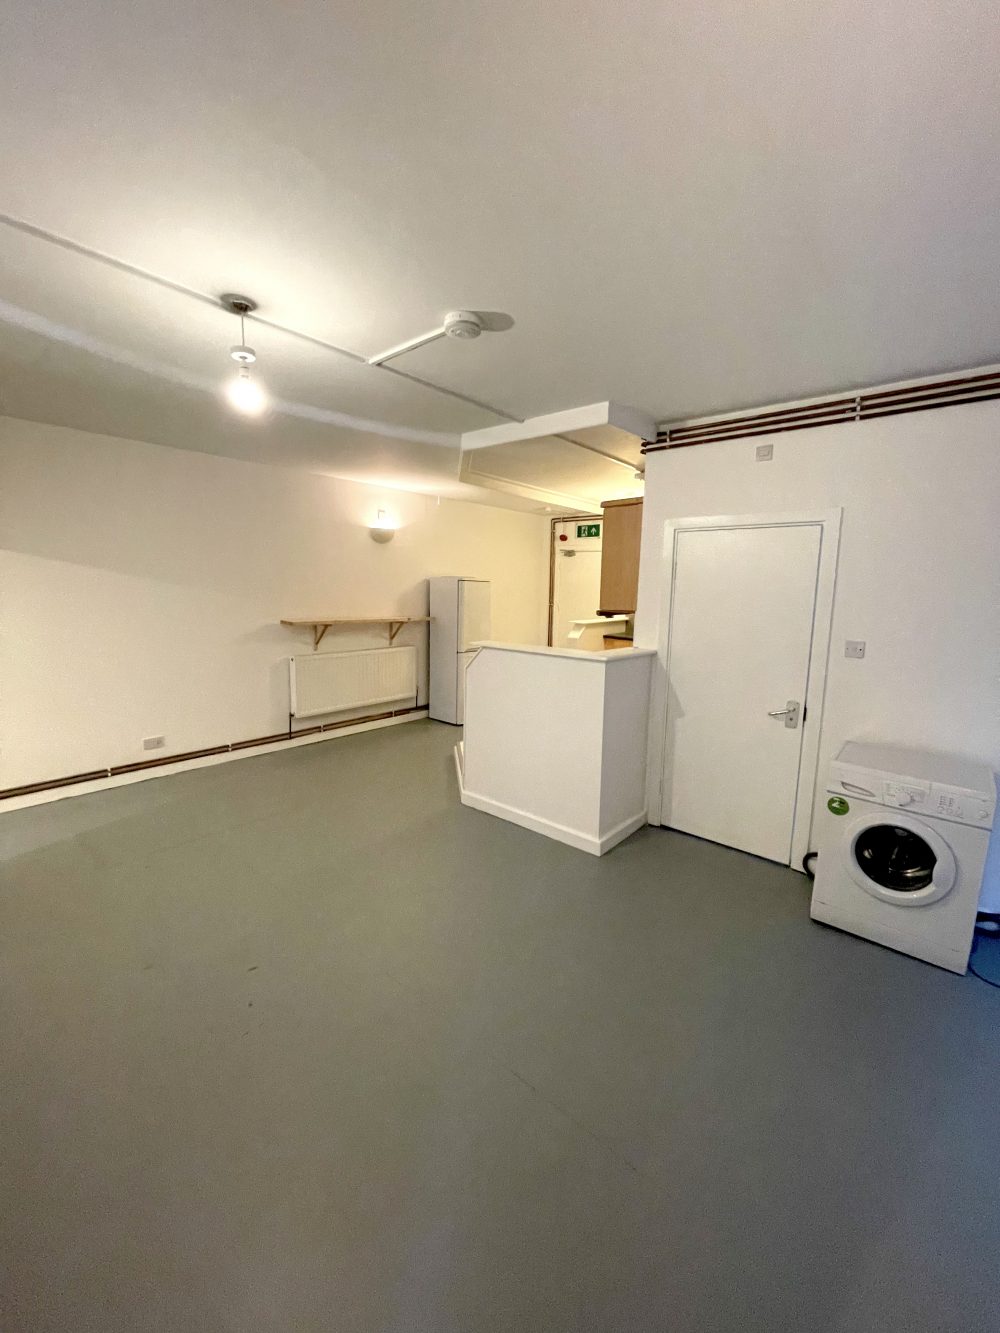 2 Bedroom Flat Available to rent in E9 London Fields Enterprise House Pic32